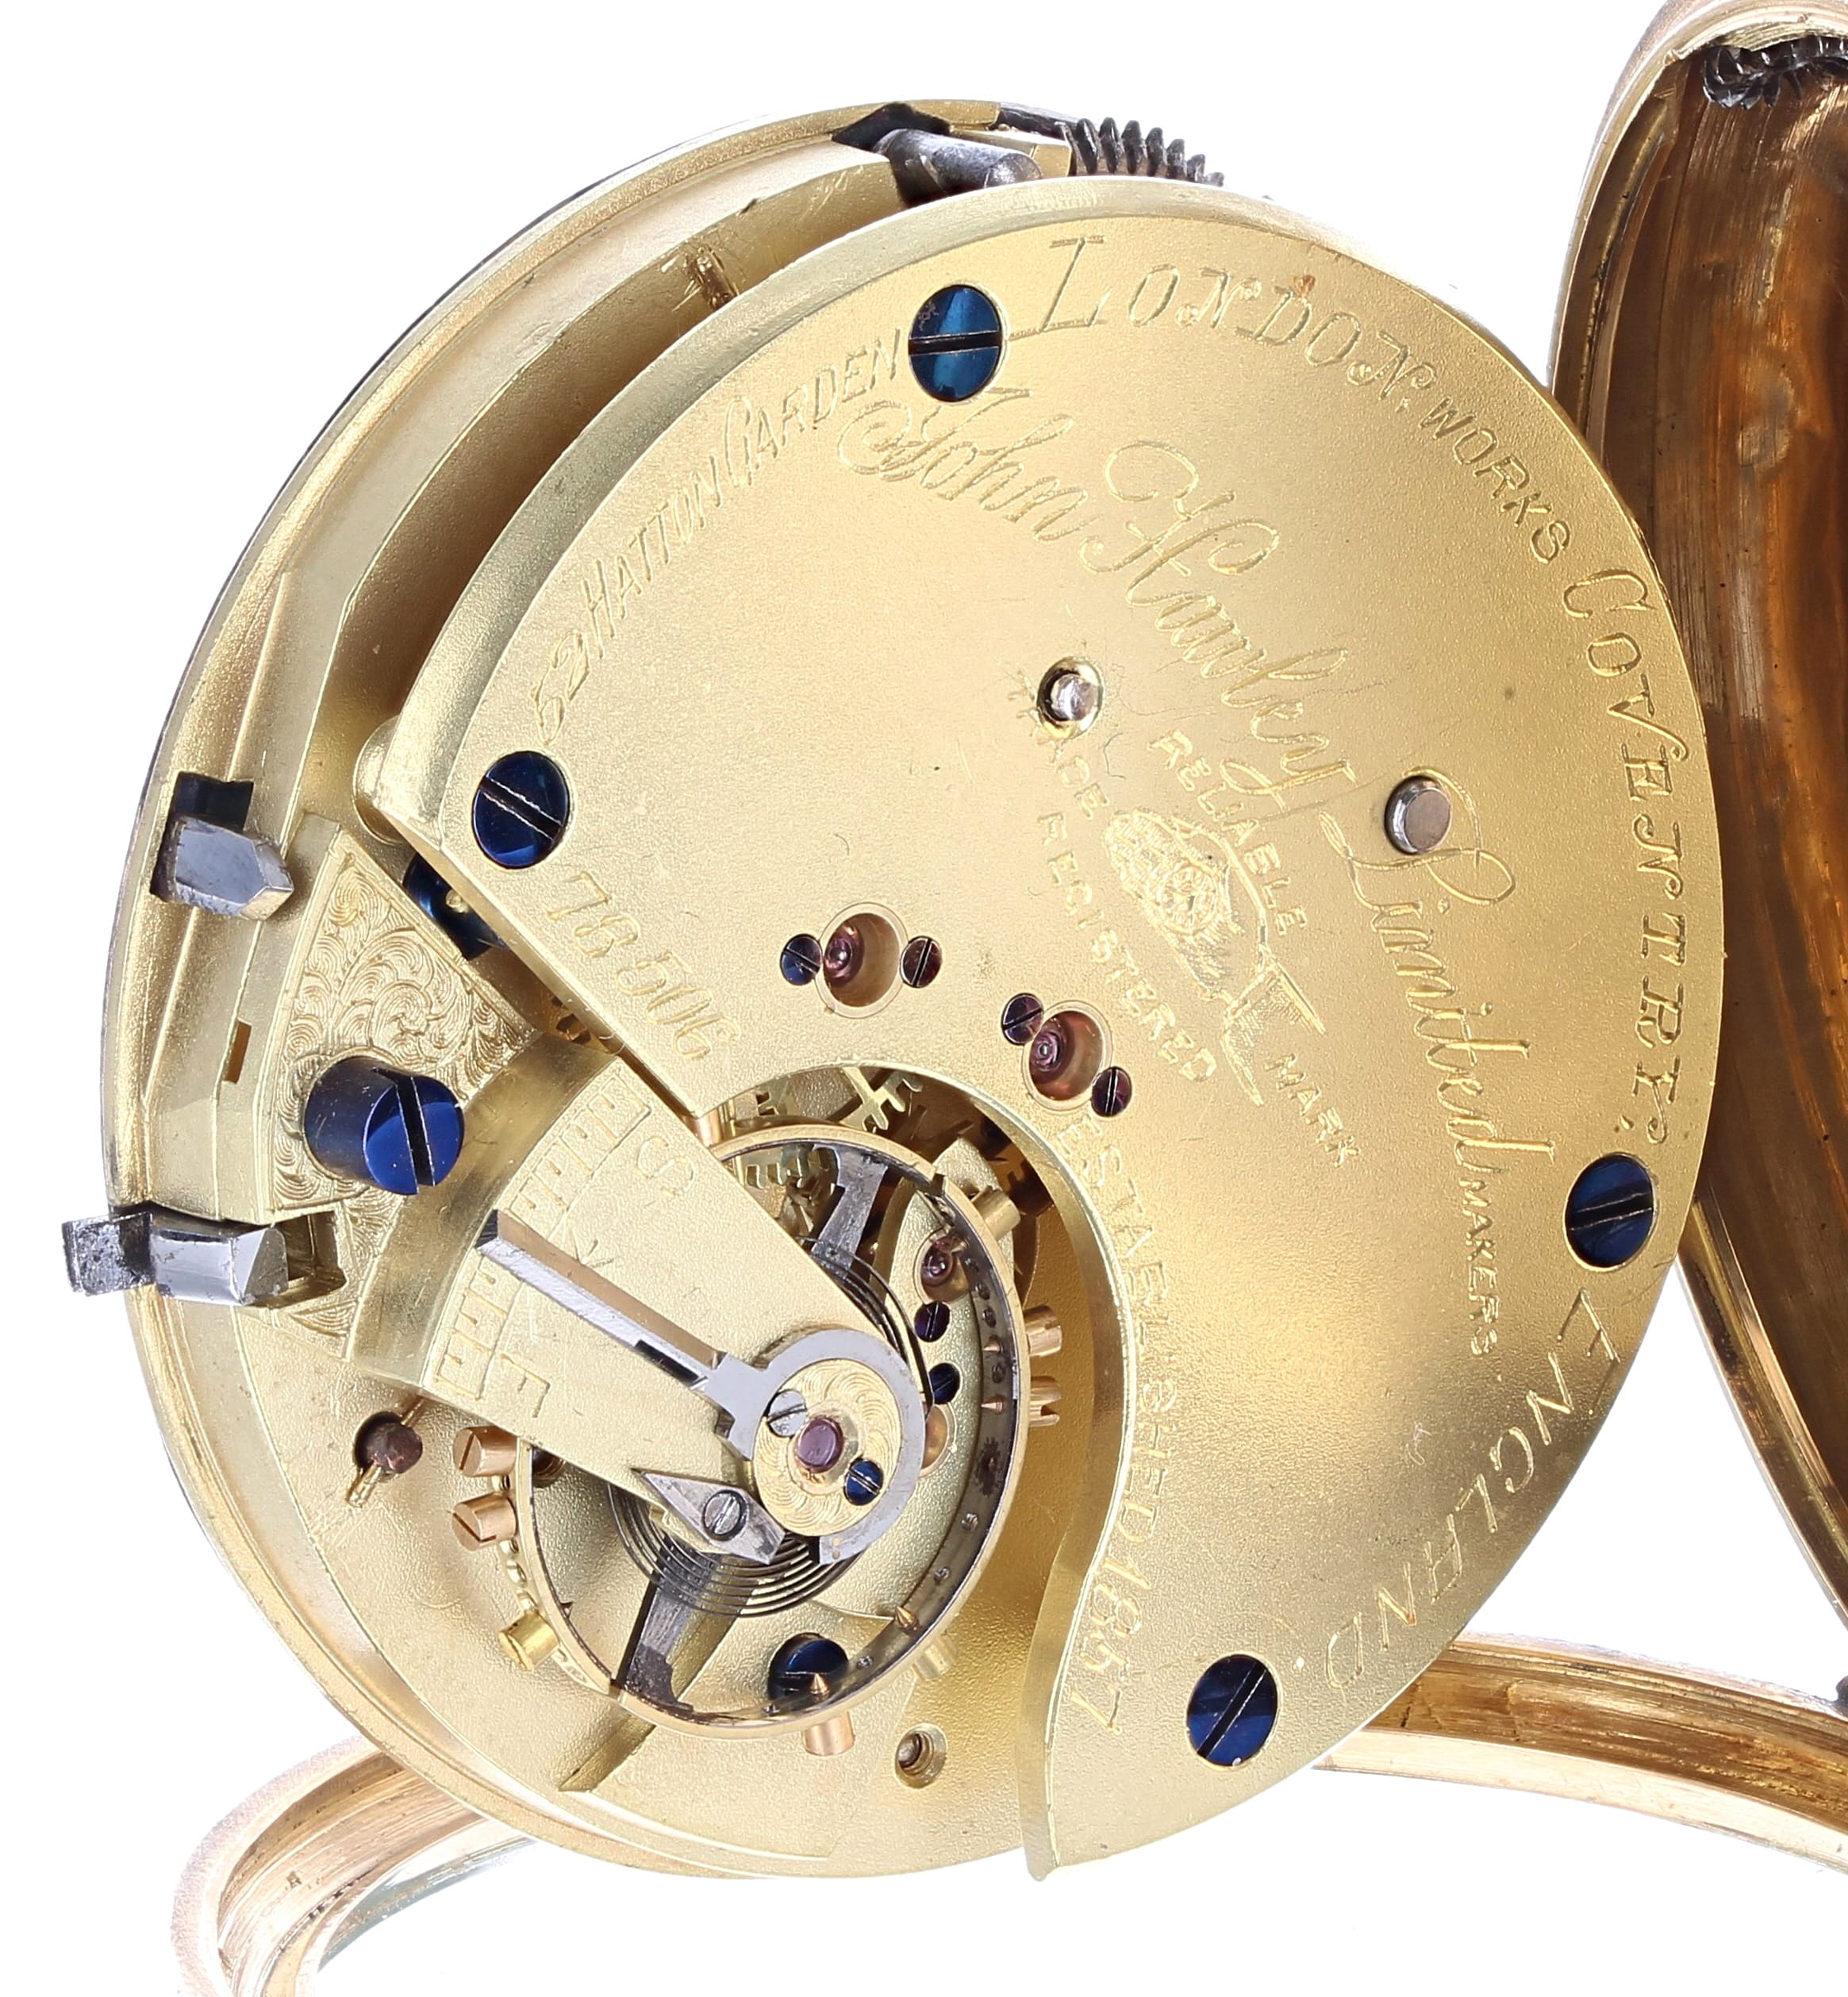 18ct centre seconds chronograph lever pocket watch, Chester 1901, the three-quarter plate movement - Image 4 of 4